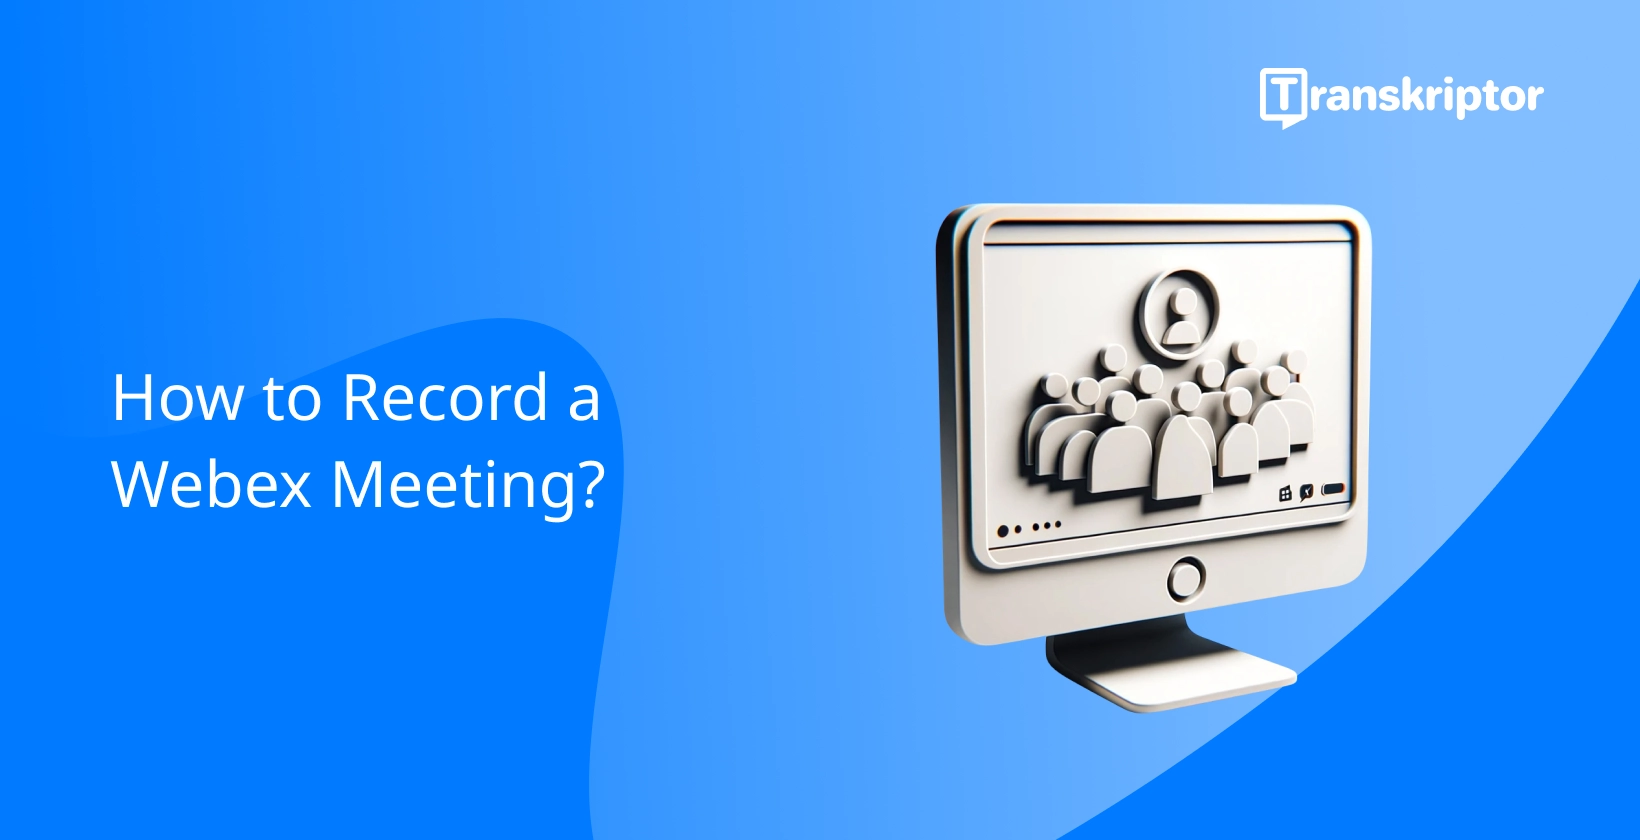 Recording Webex meetings with a play button and meeting interface.